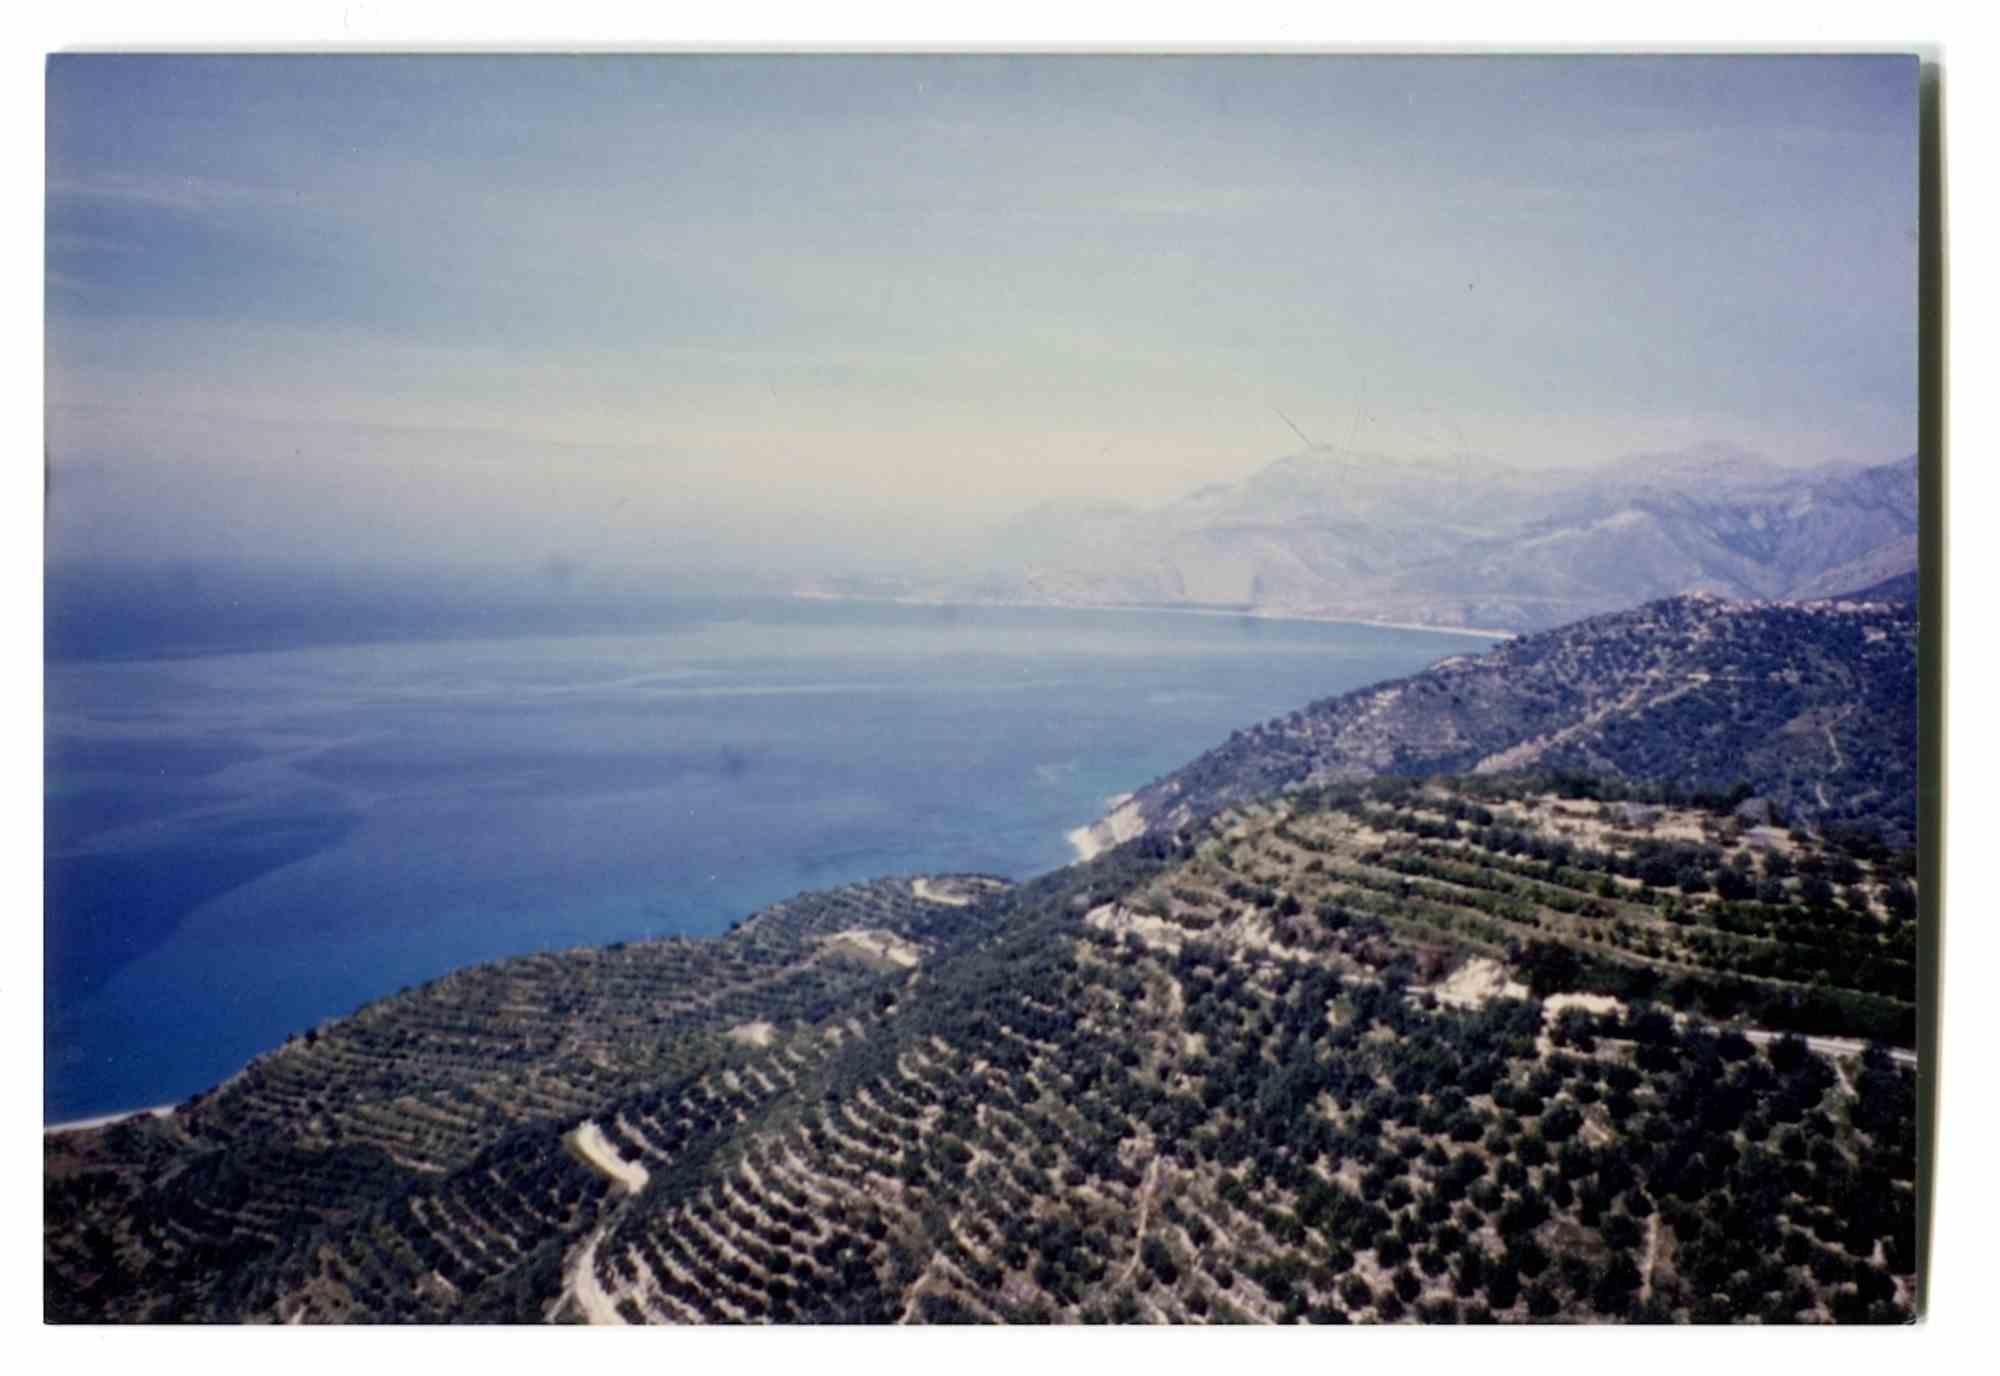 Unknown Landscape Photograph - Reportage from Albania - Lukovë - Late 1970s